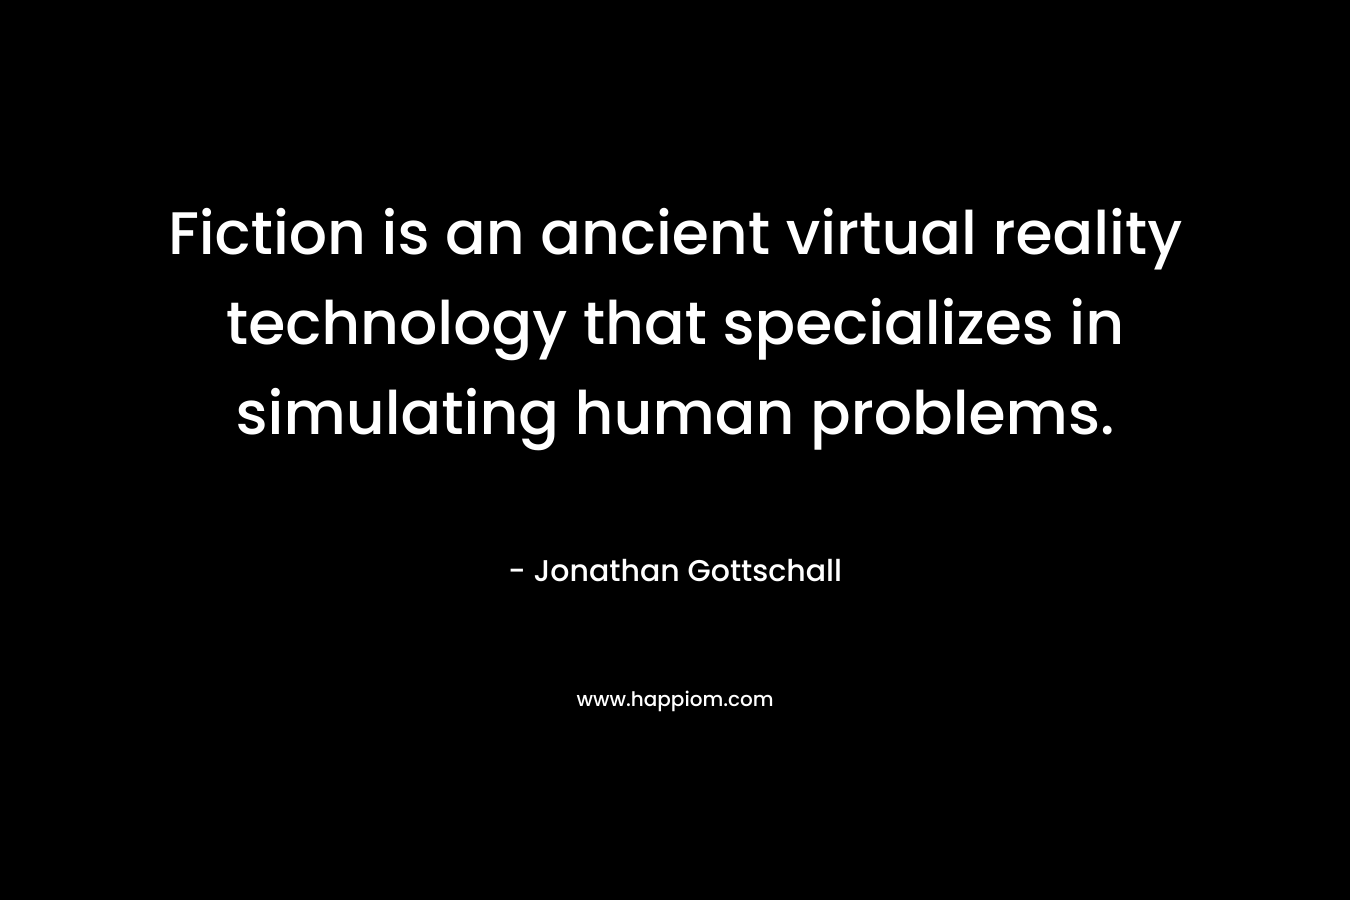 Fiction is an ancient virtual reality technology that specializes in simulating human problems. – Jonathan Gottschall